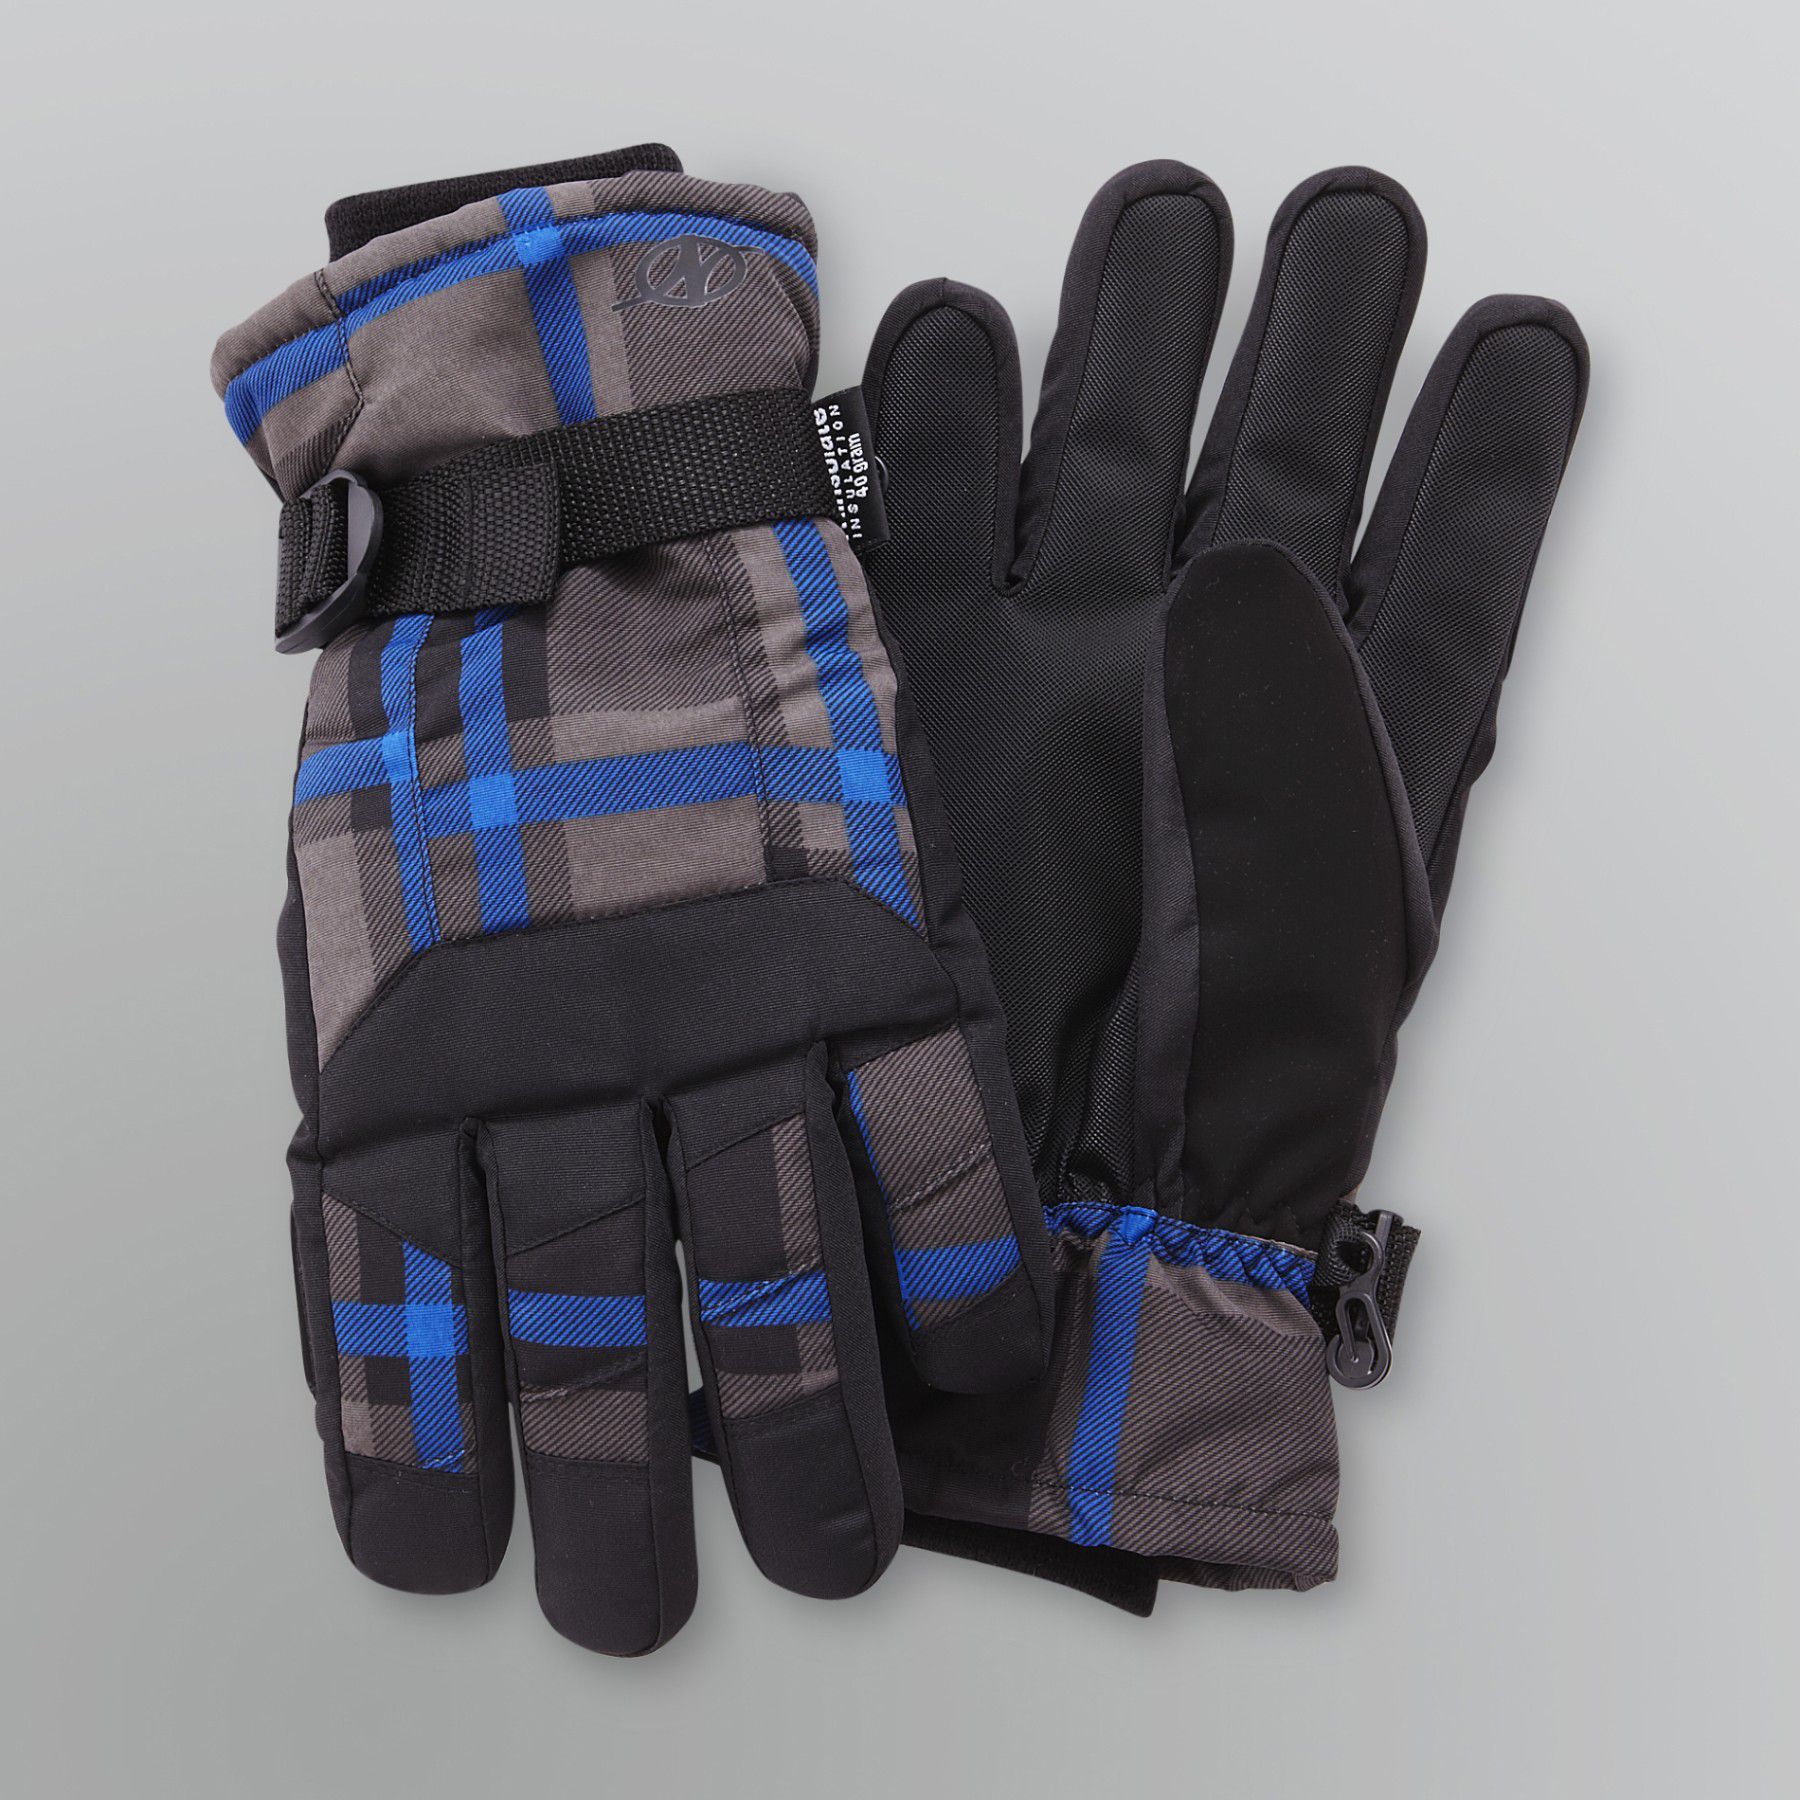 NordicTrack Men's Plaid Thinsulate Winter Gloves